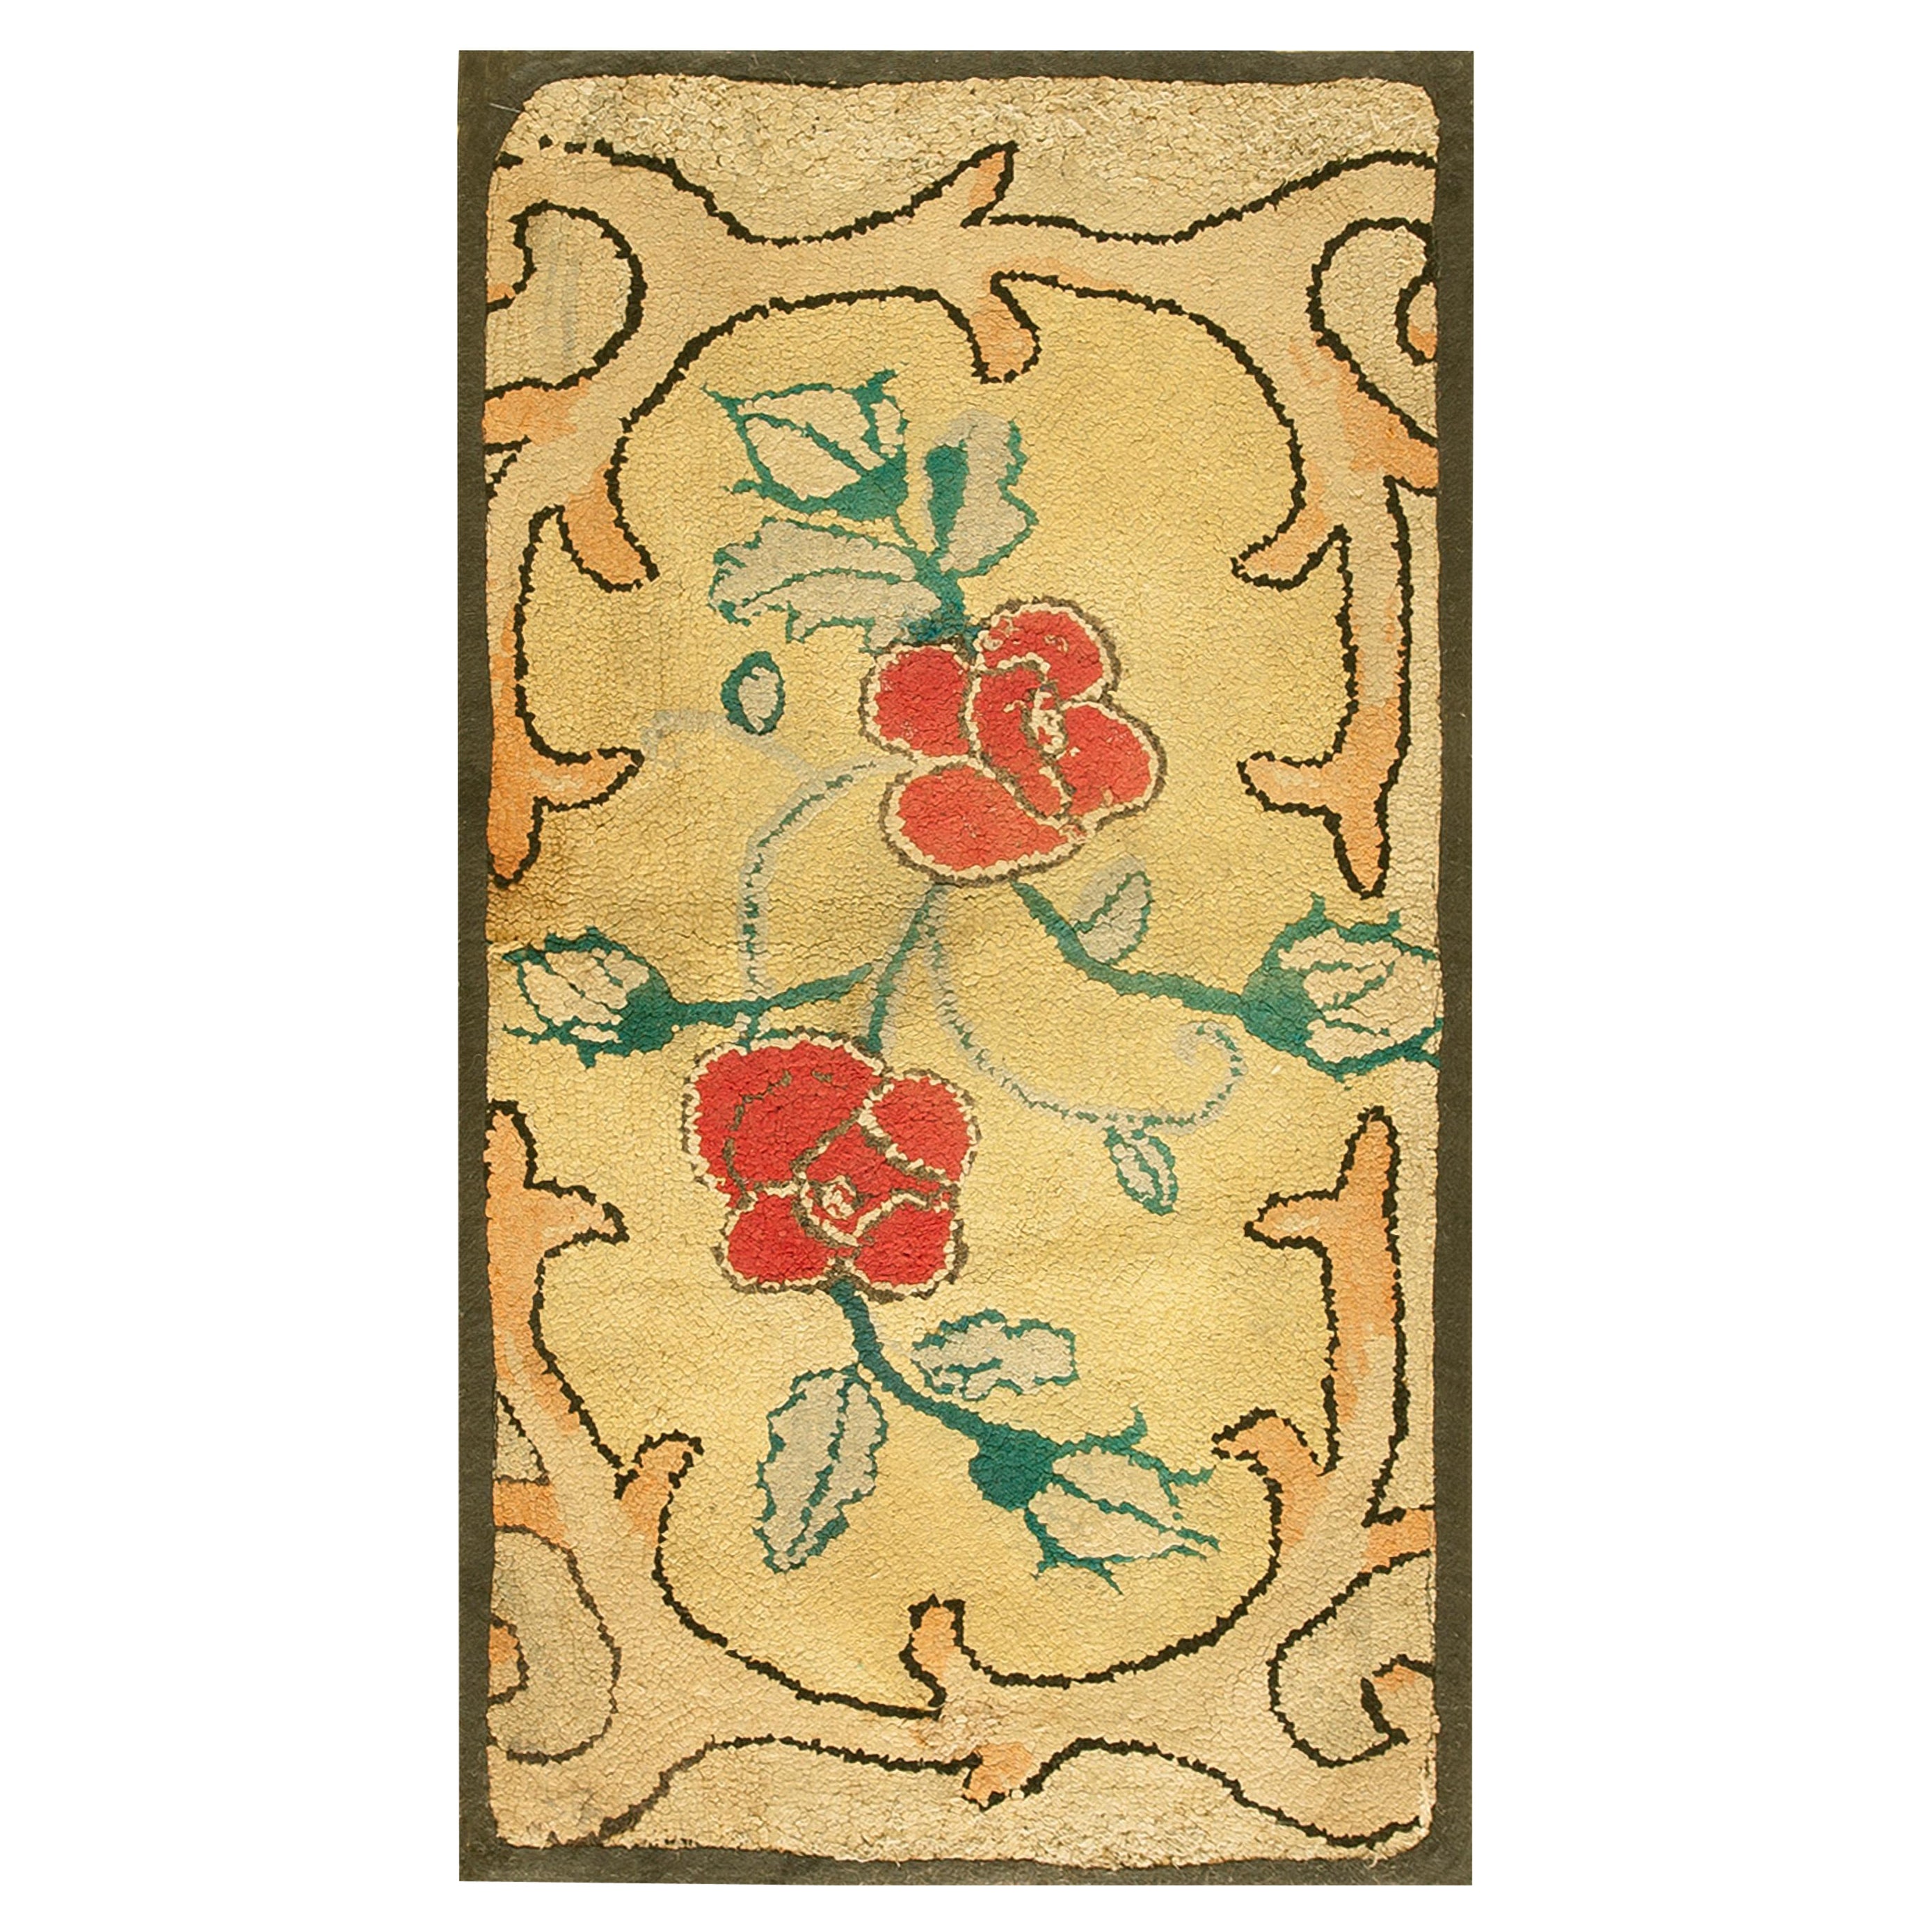 Early 20th Century  American Hooked Rug ( 1'7" x 3' - 48 x 91 cm )  For Sale